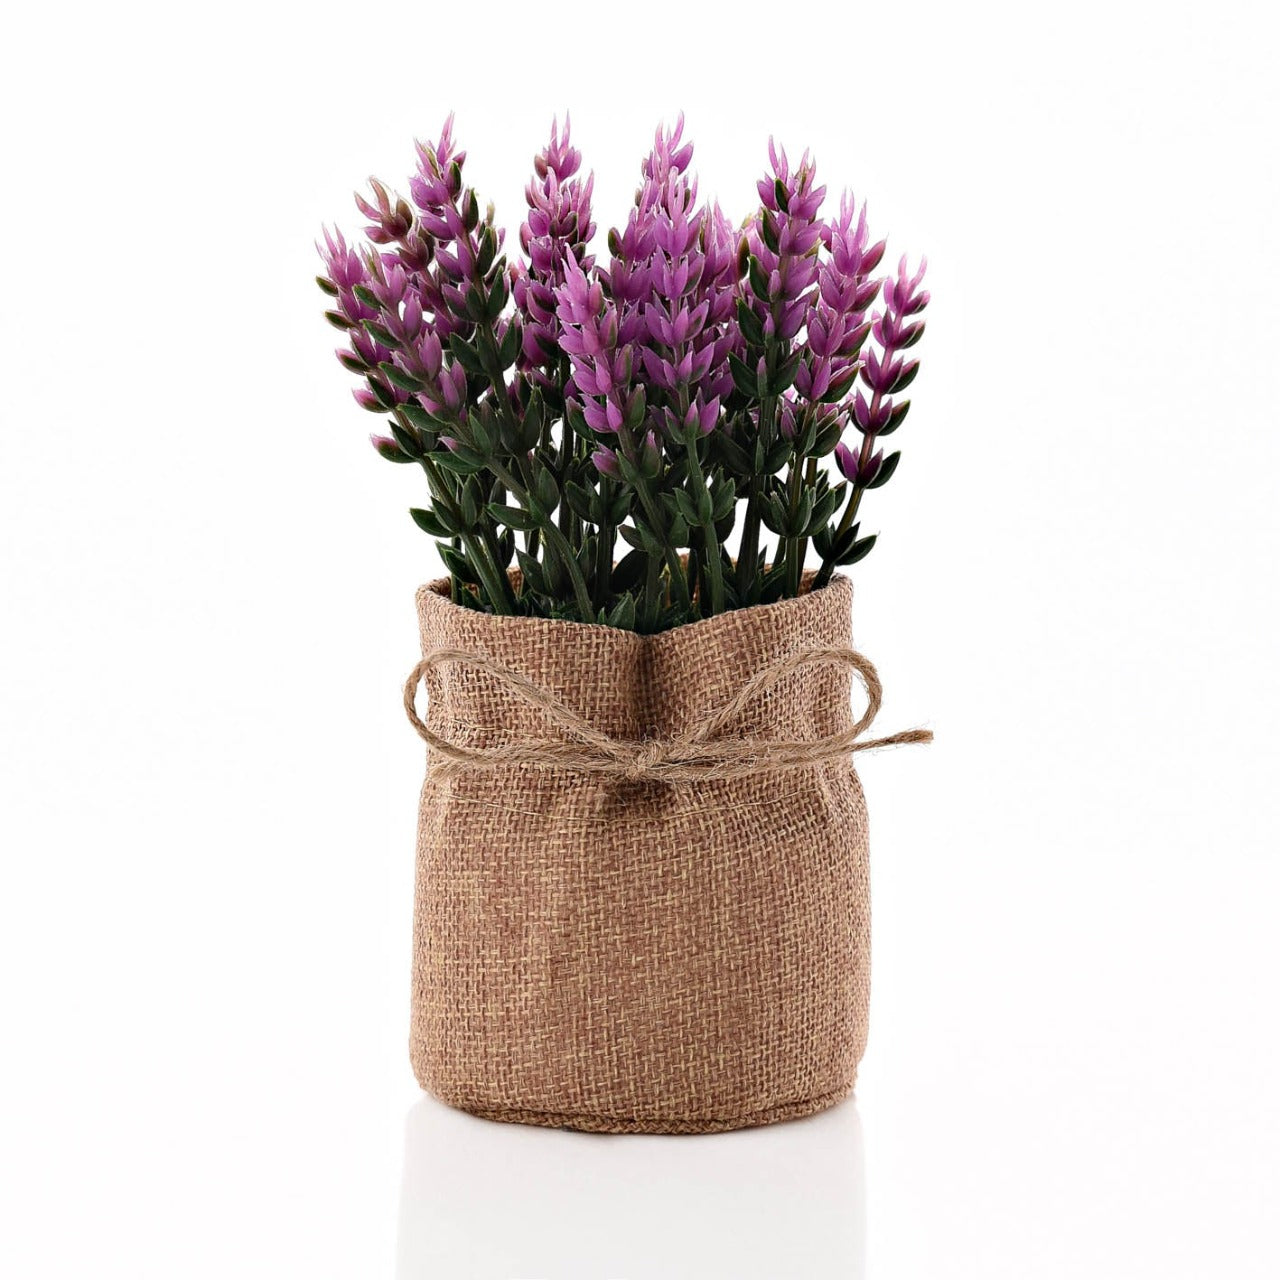 Small Faux Plant In Hessian Bag 17 cm  Small and stylish, this faux plant would make a cute and rustic addition to any desk, side table, window ledge or mantel this spring